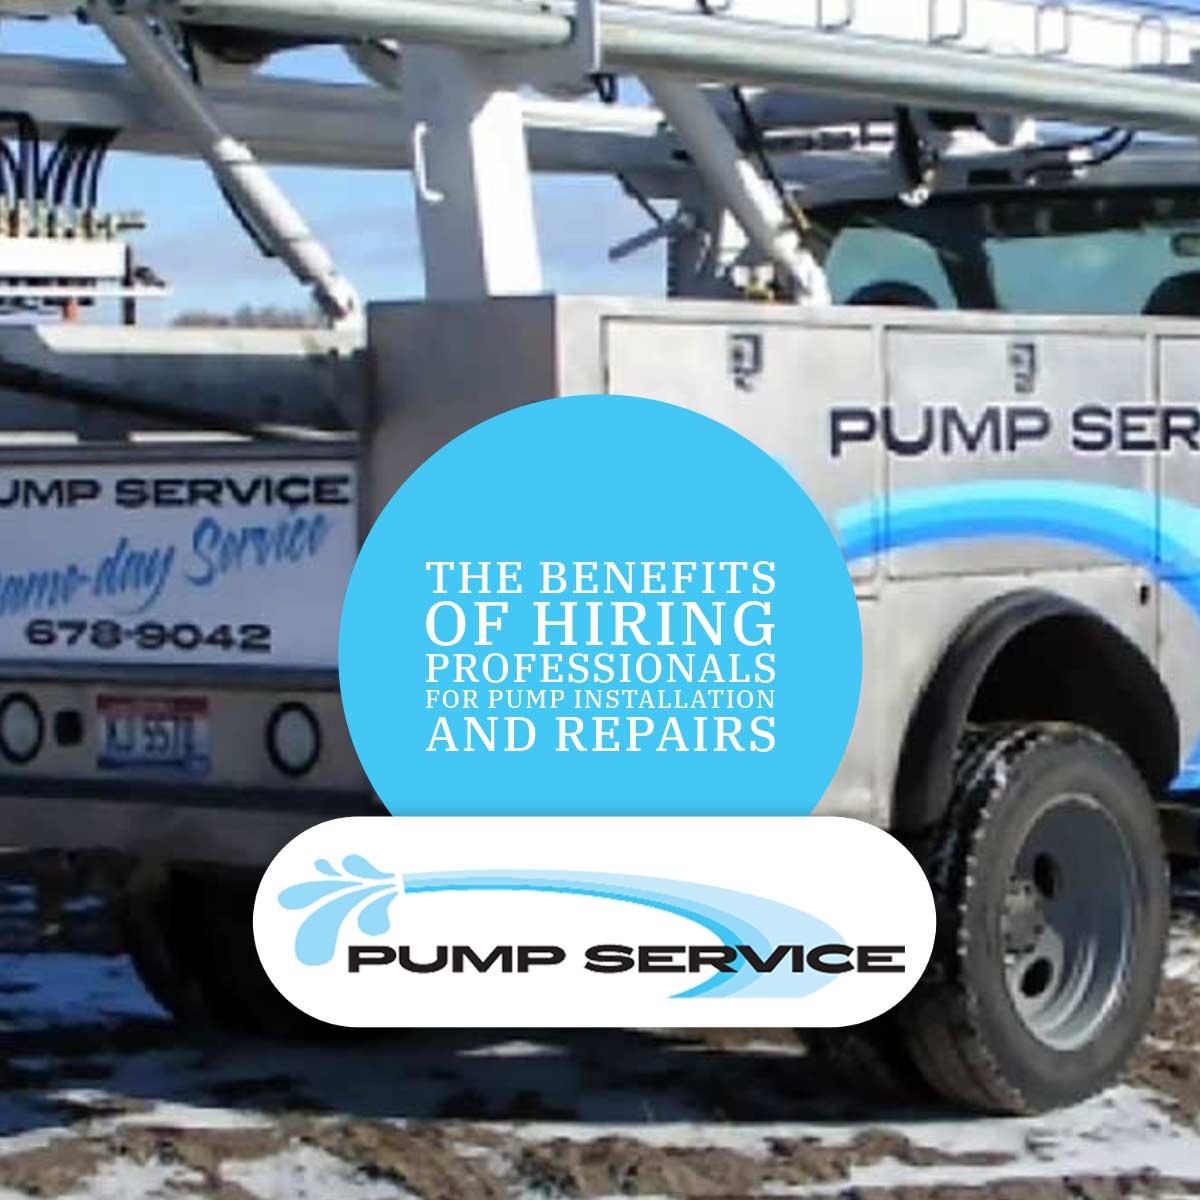 The Benefits of Hiring Professionals for Pump Installation and Repairs